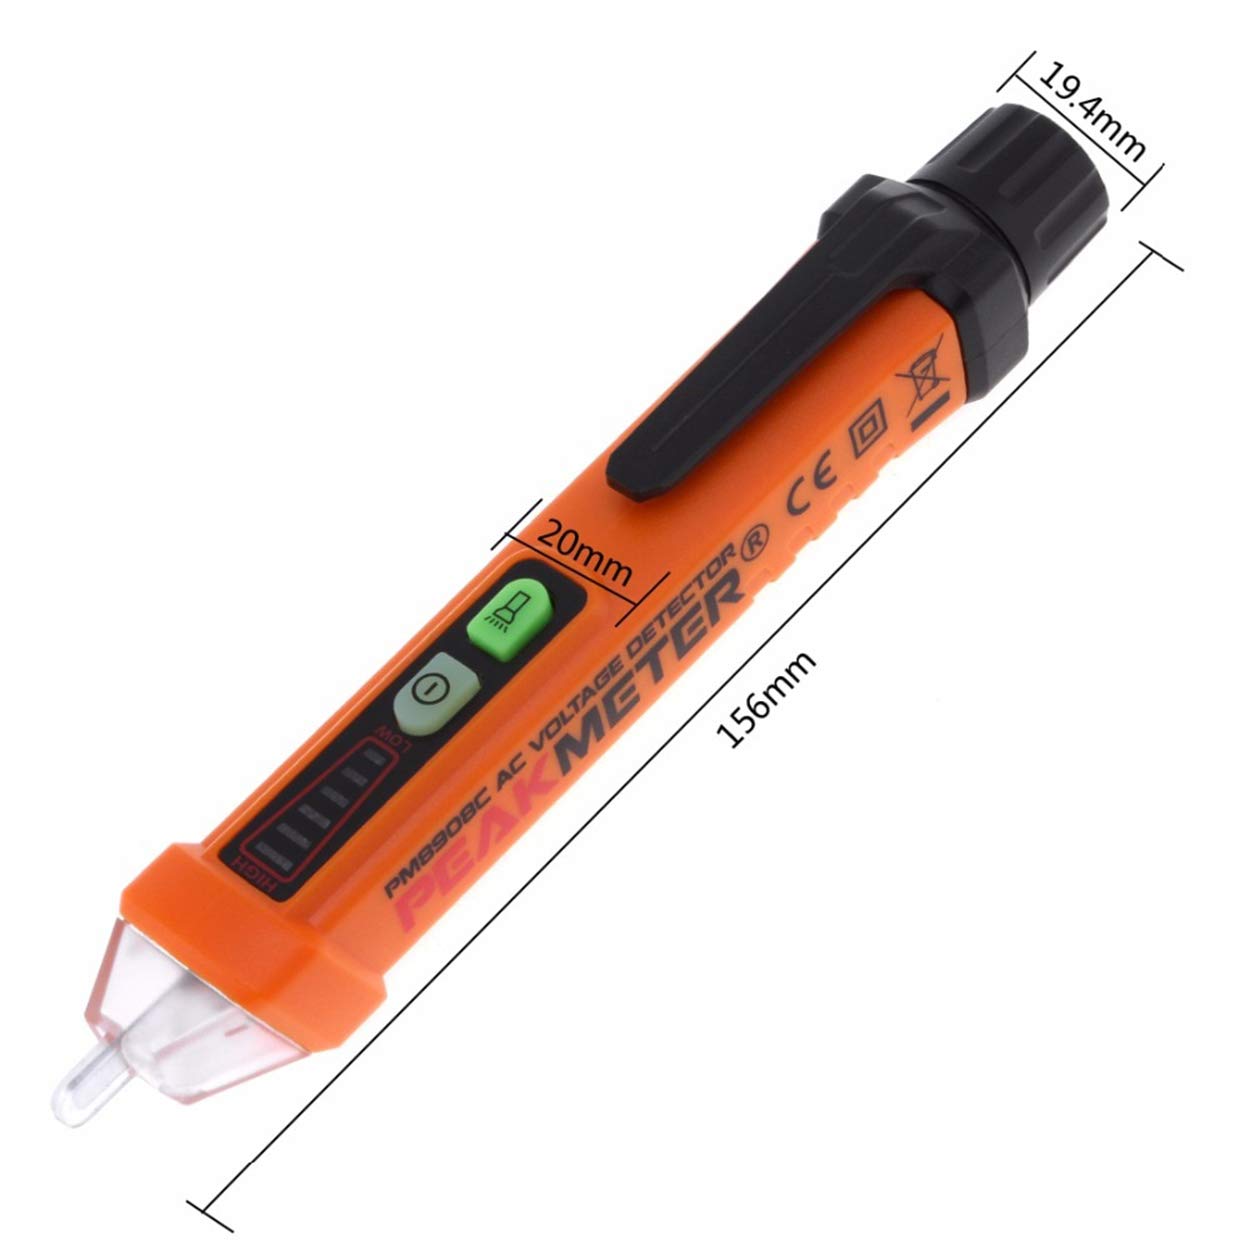 Touchless Voltage Detector (PM8908C) with AAA Battery